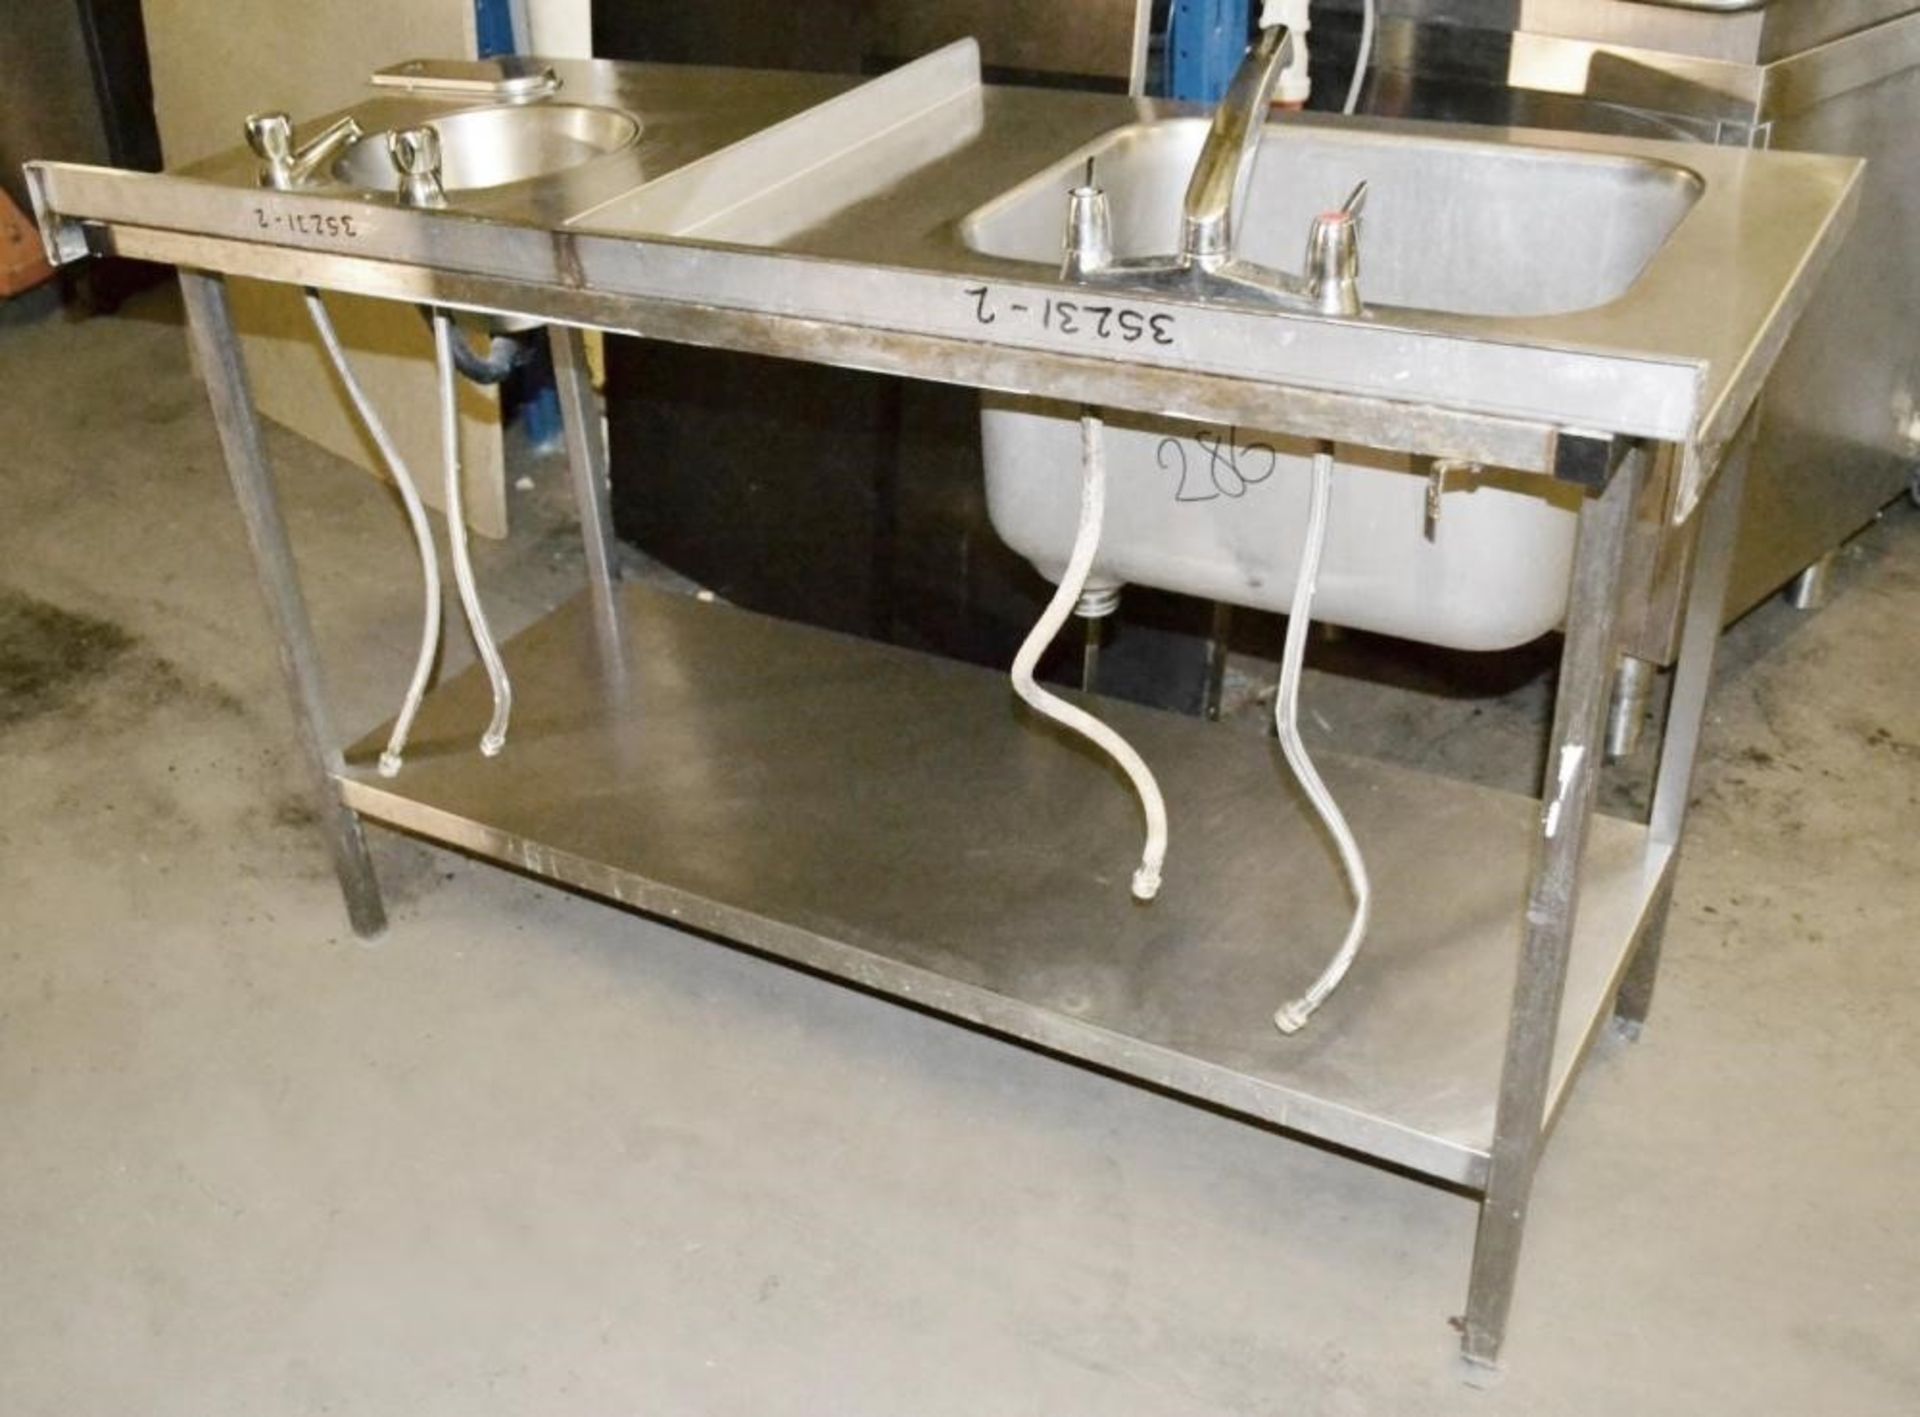 1 x Commercial Stainless Steel Double Sink Unit With Mixer Tap, Spillage Lip, Splashback and Undersh - Image 2 of 6